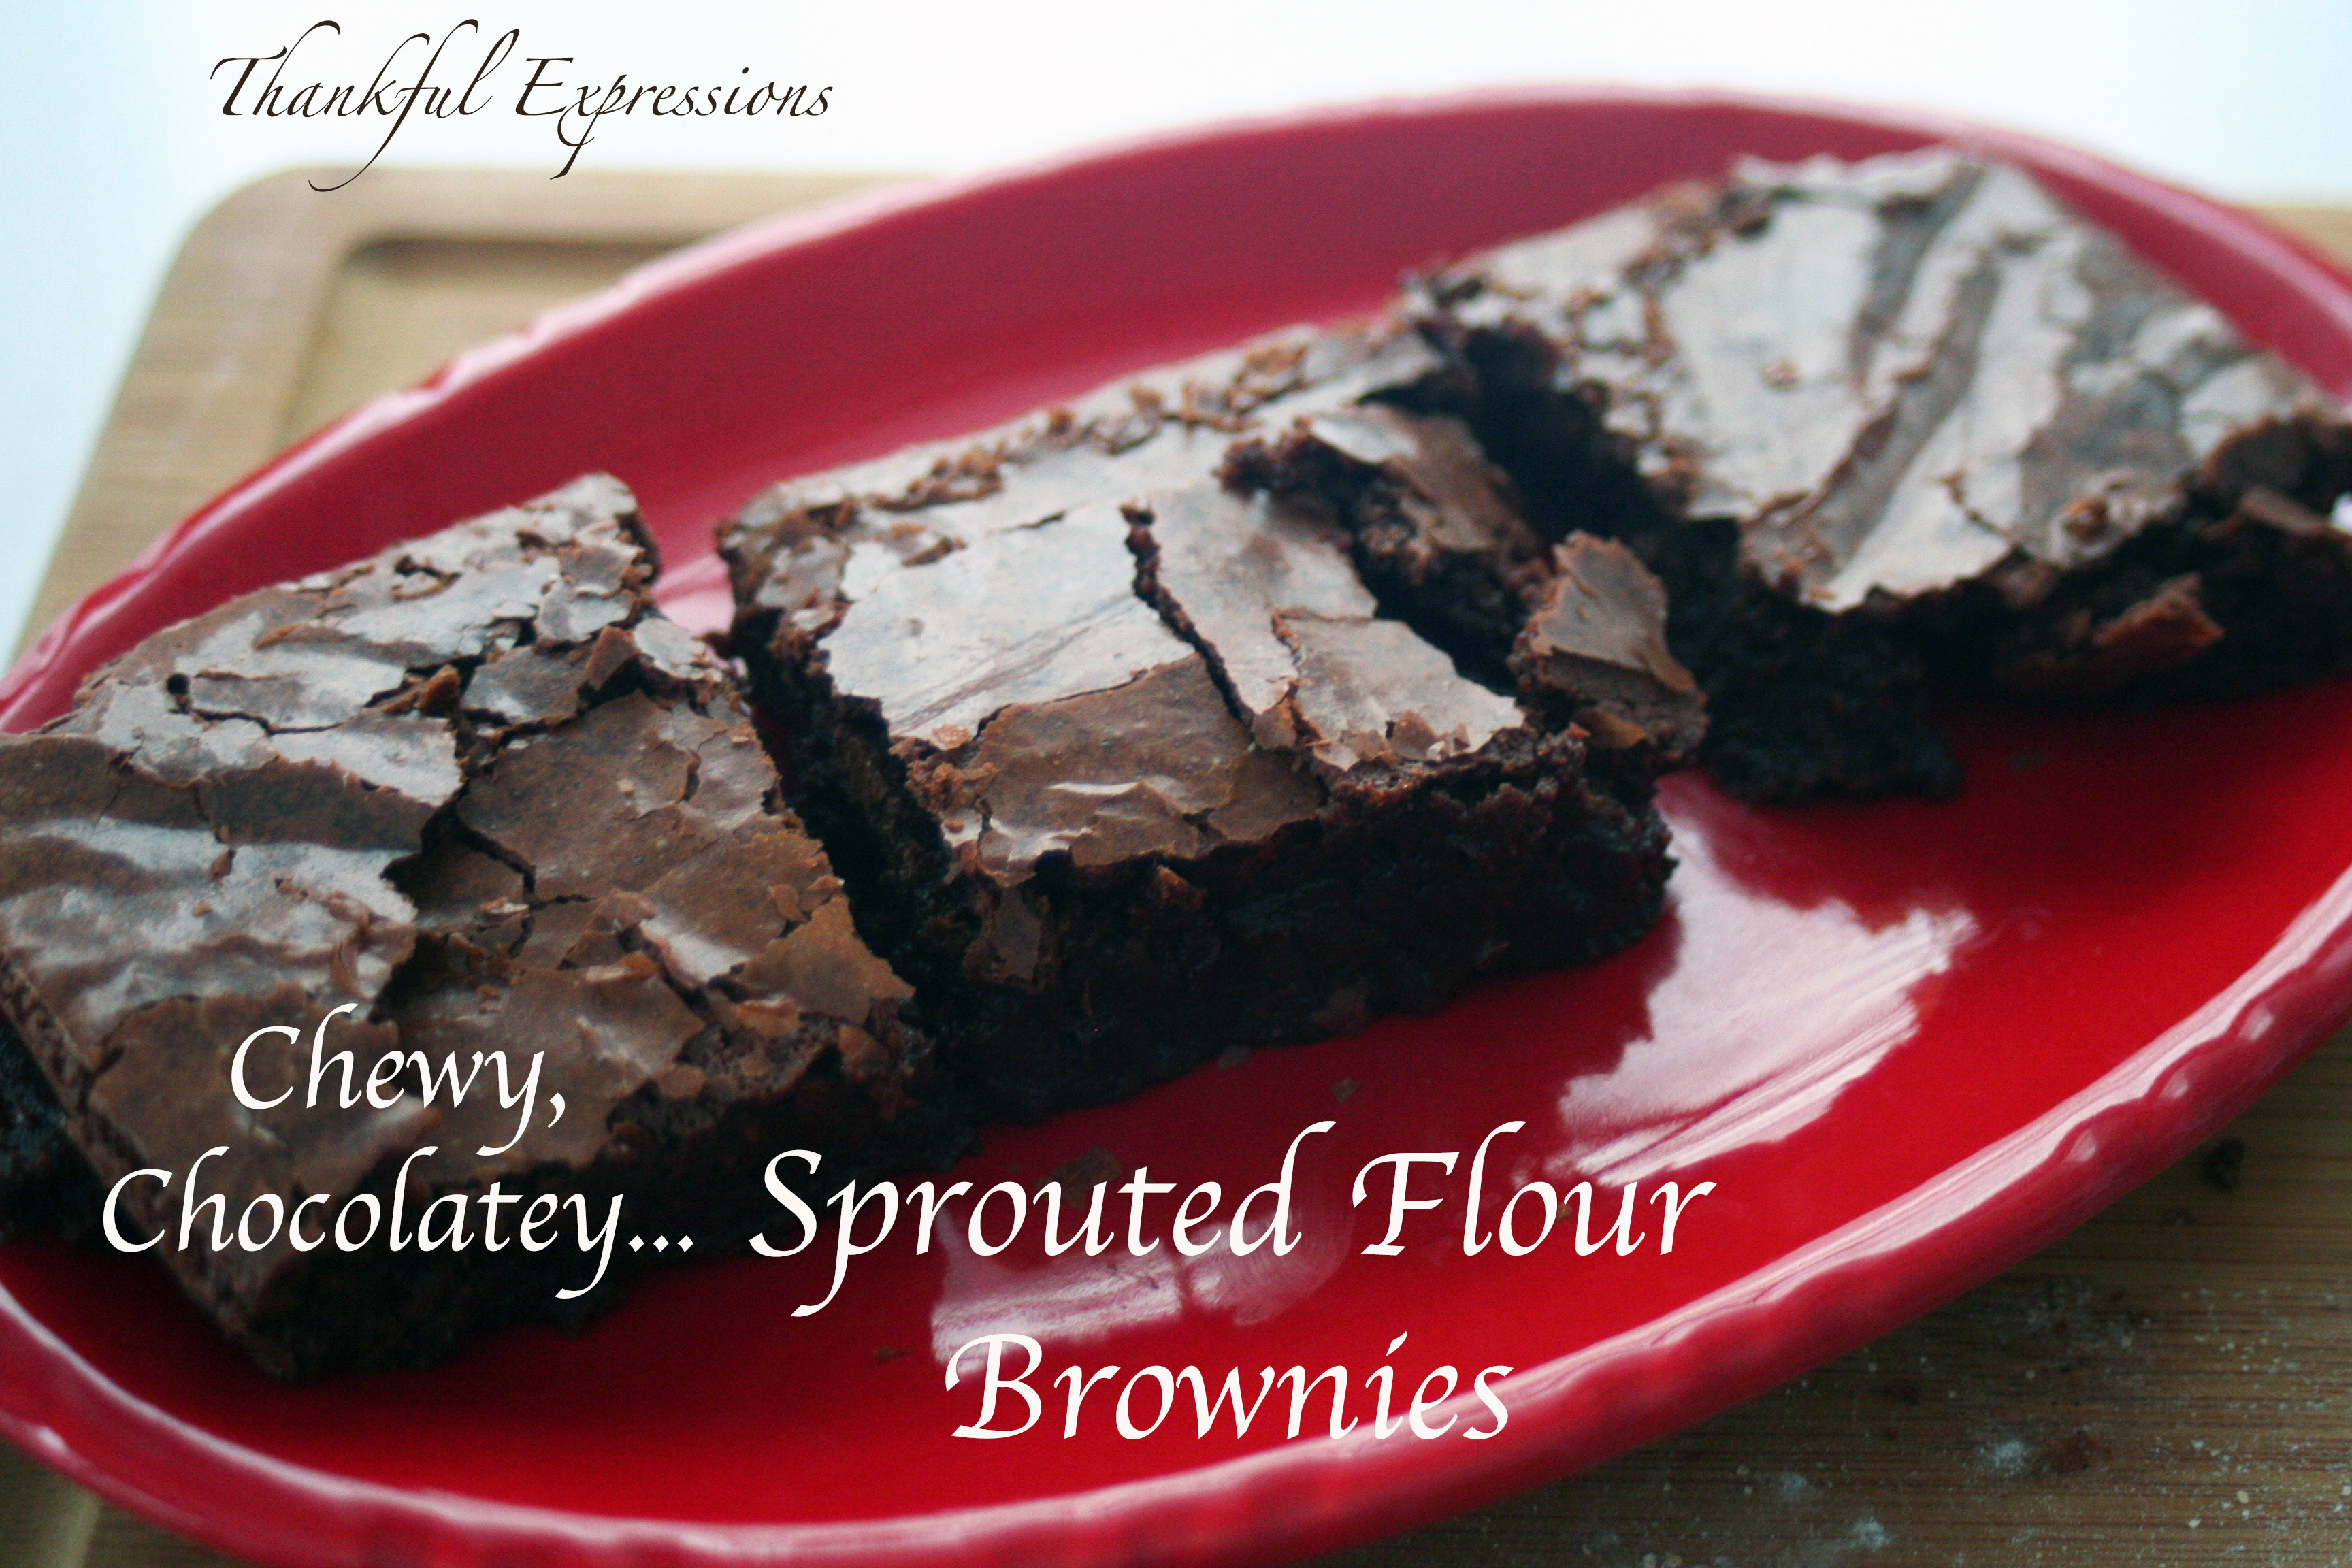 Chewy, Chocolatey, Sprouted Flour Brownies